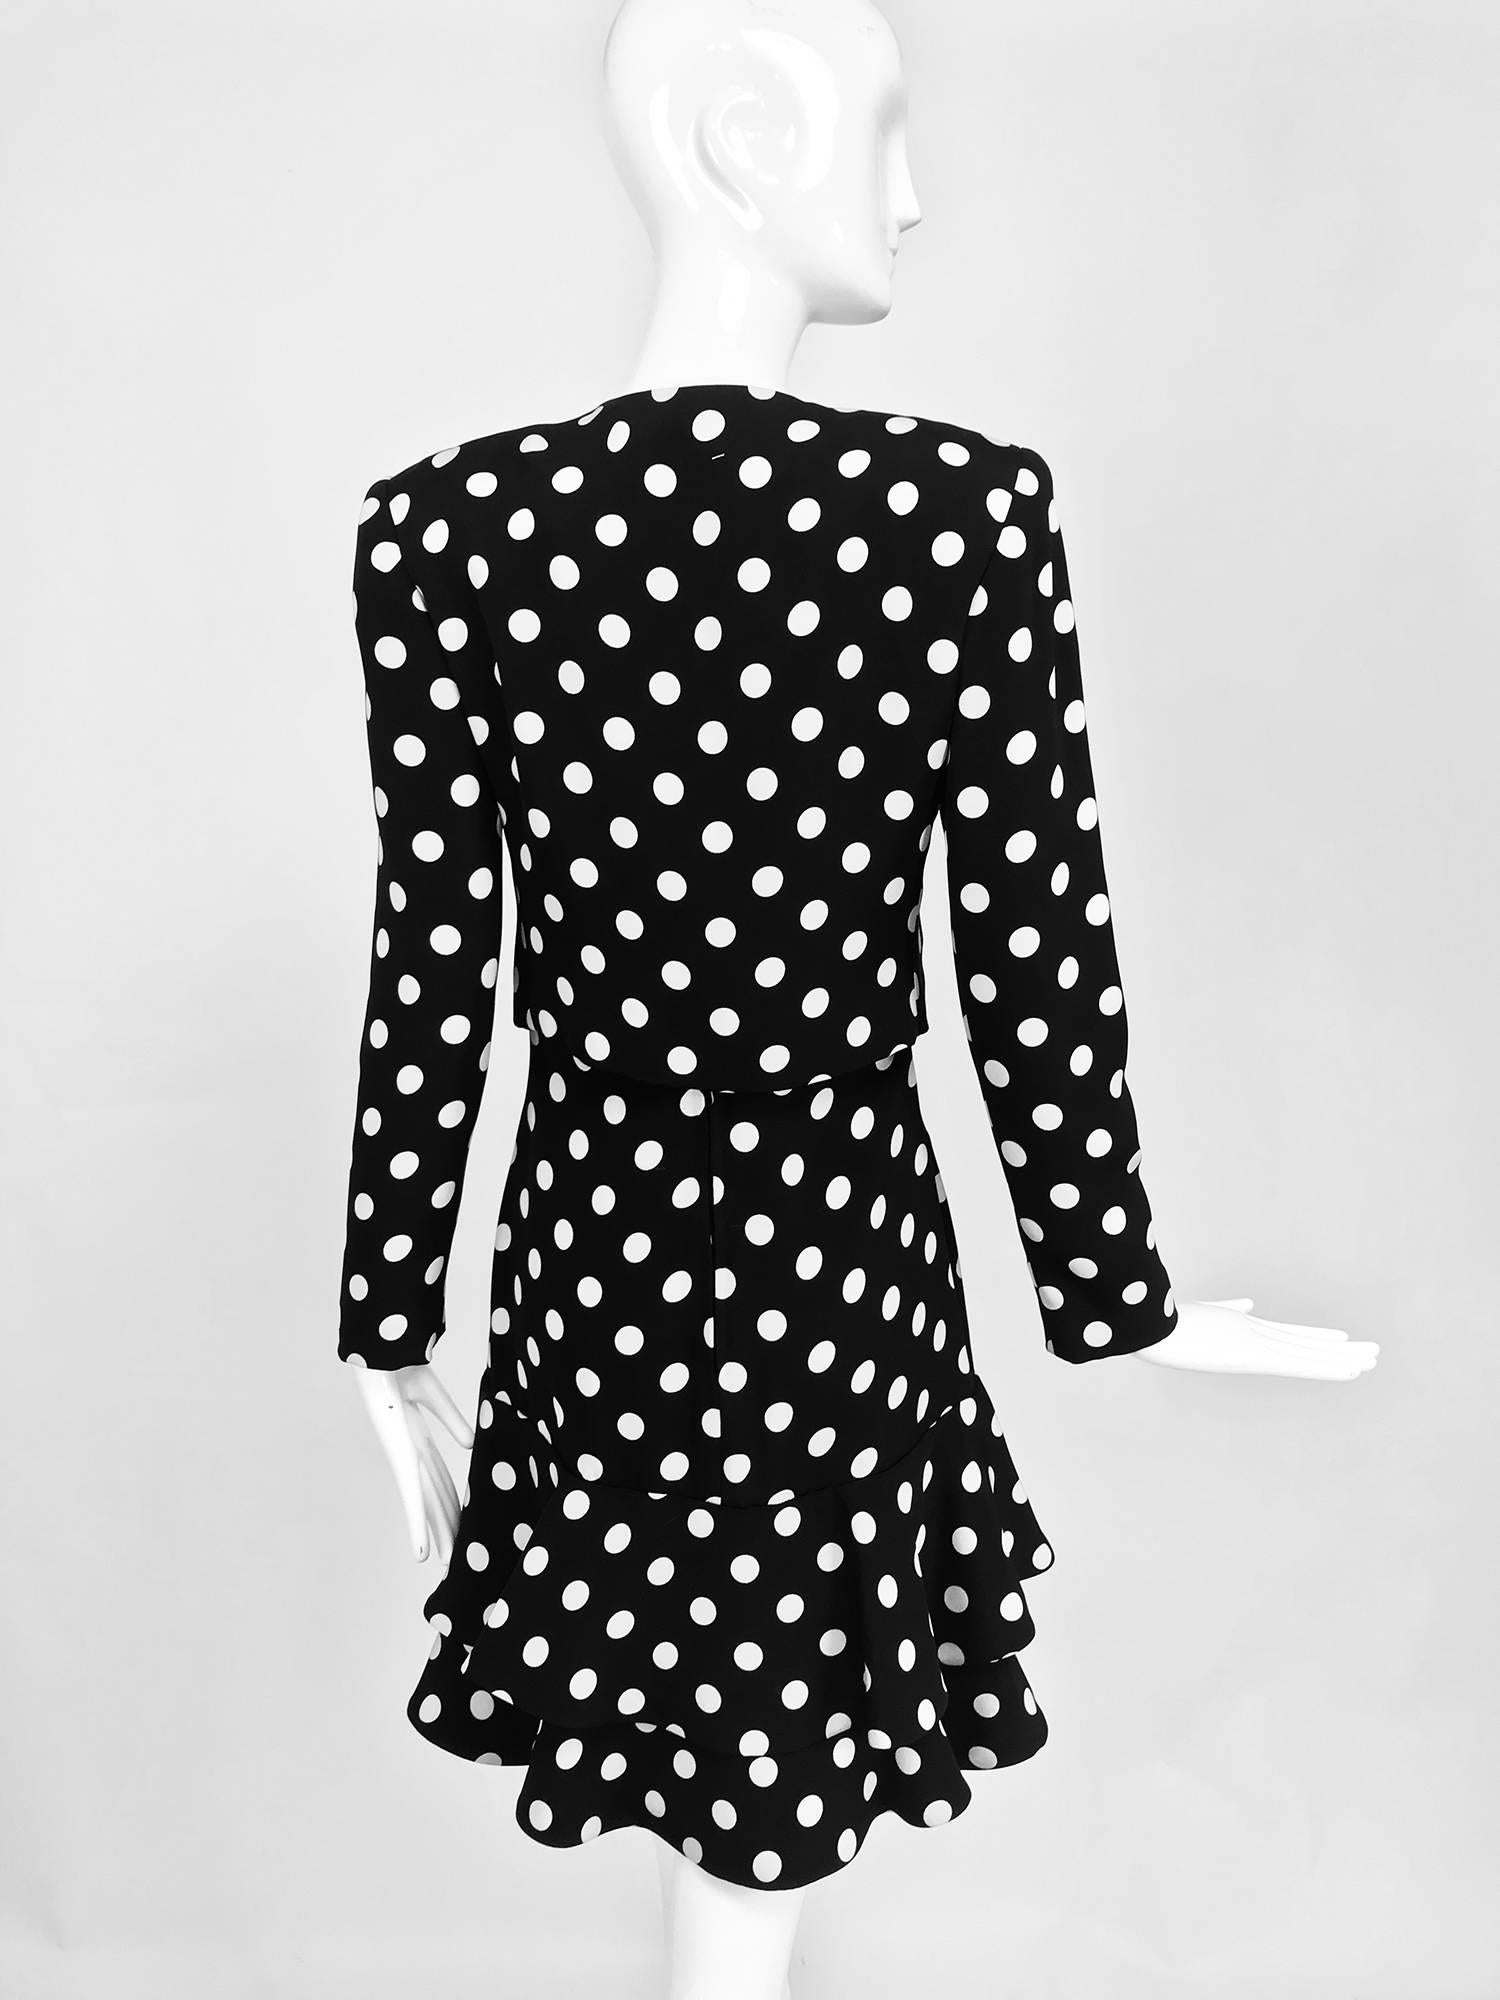 Carolyne Roehm black and white polka dot strapless dress and jacket 1990s For Sale 3